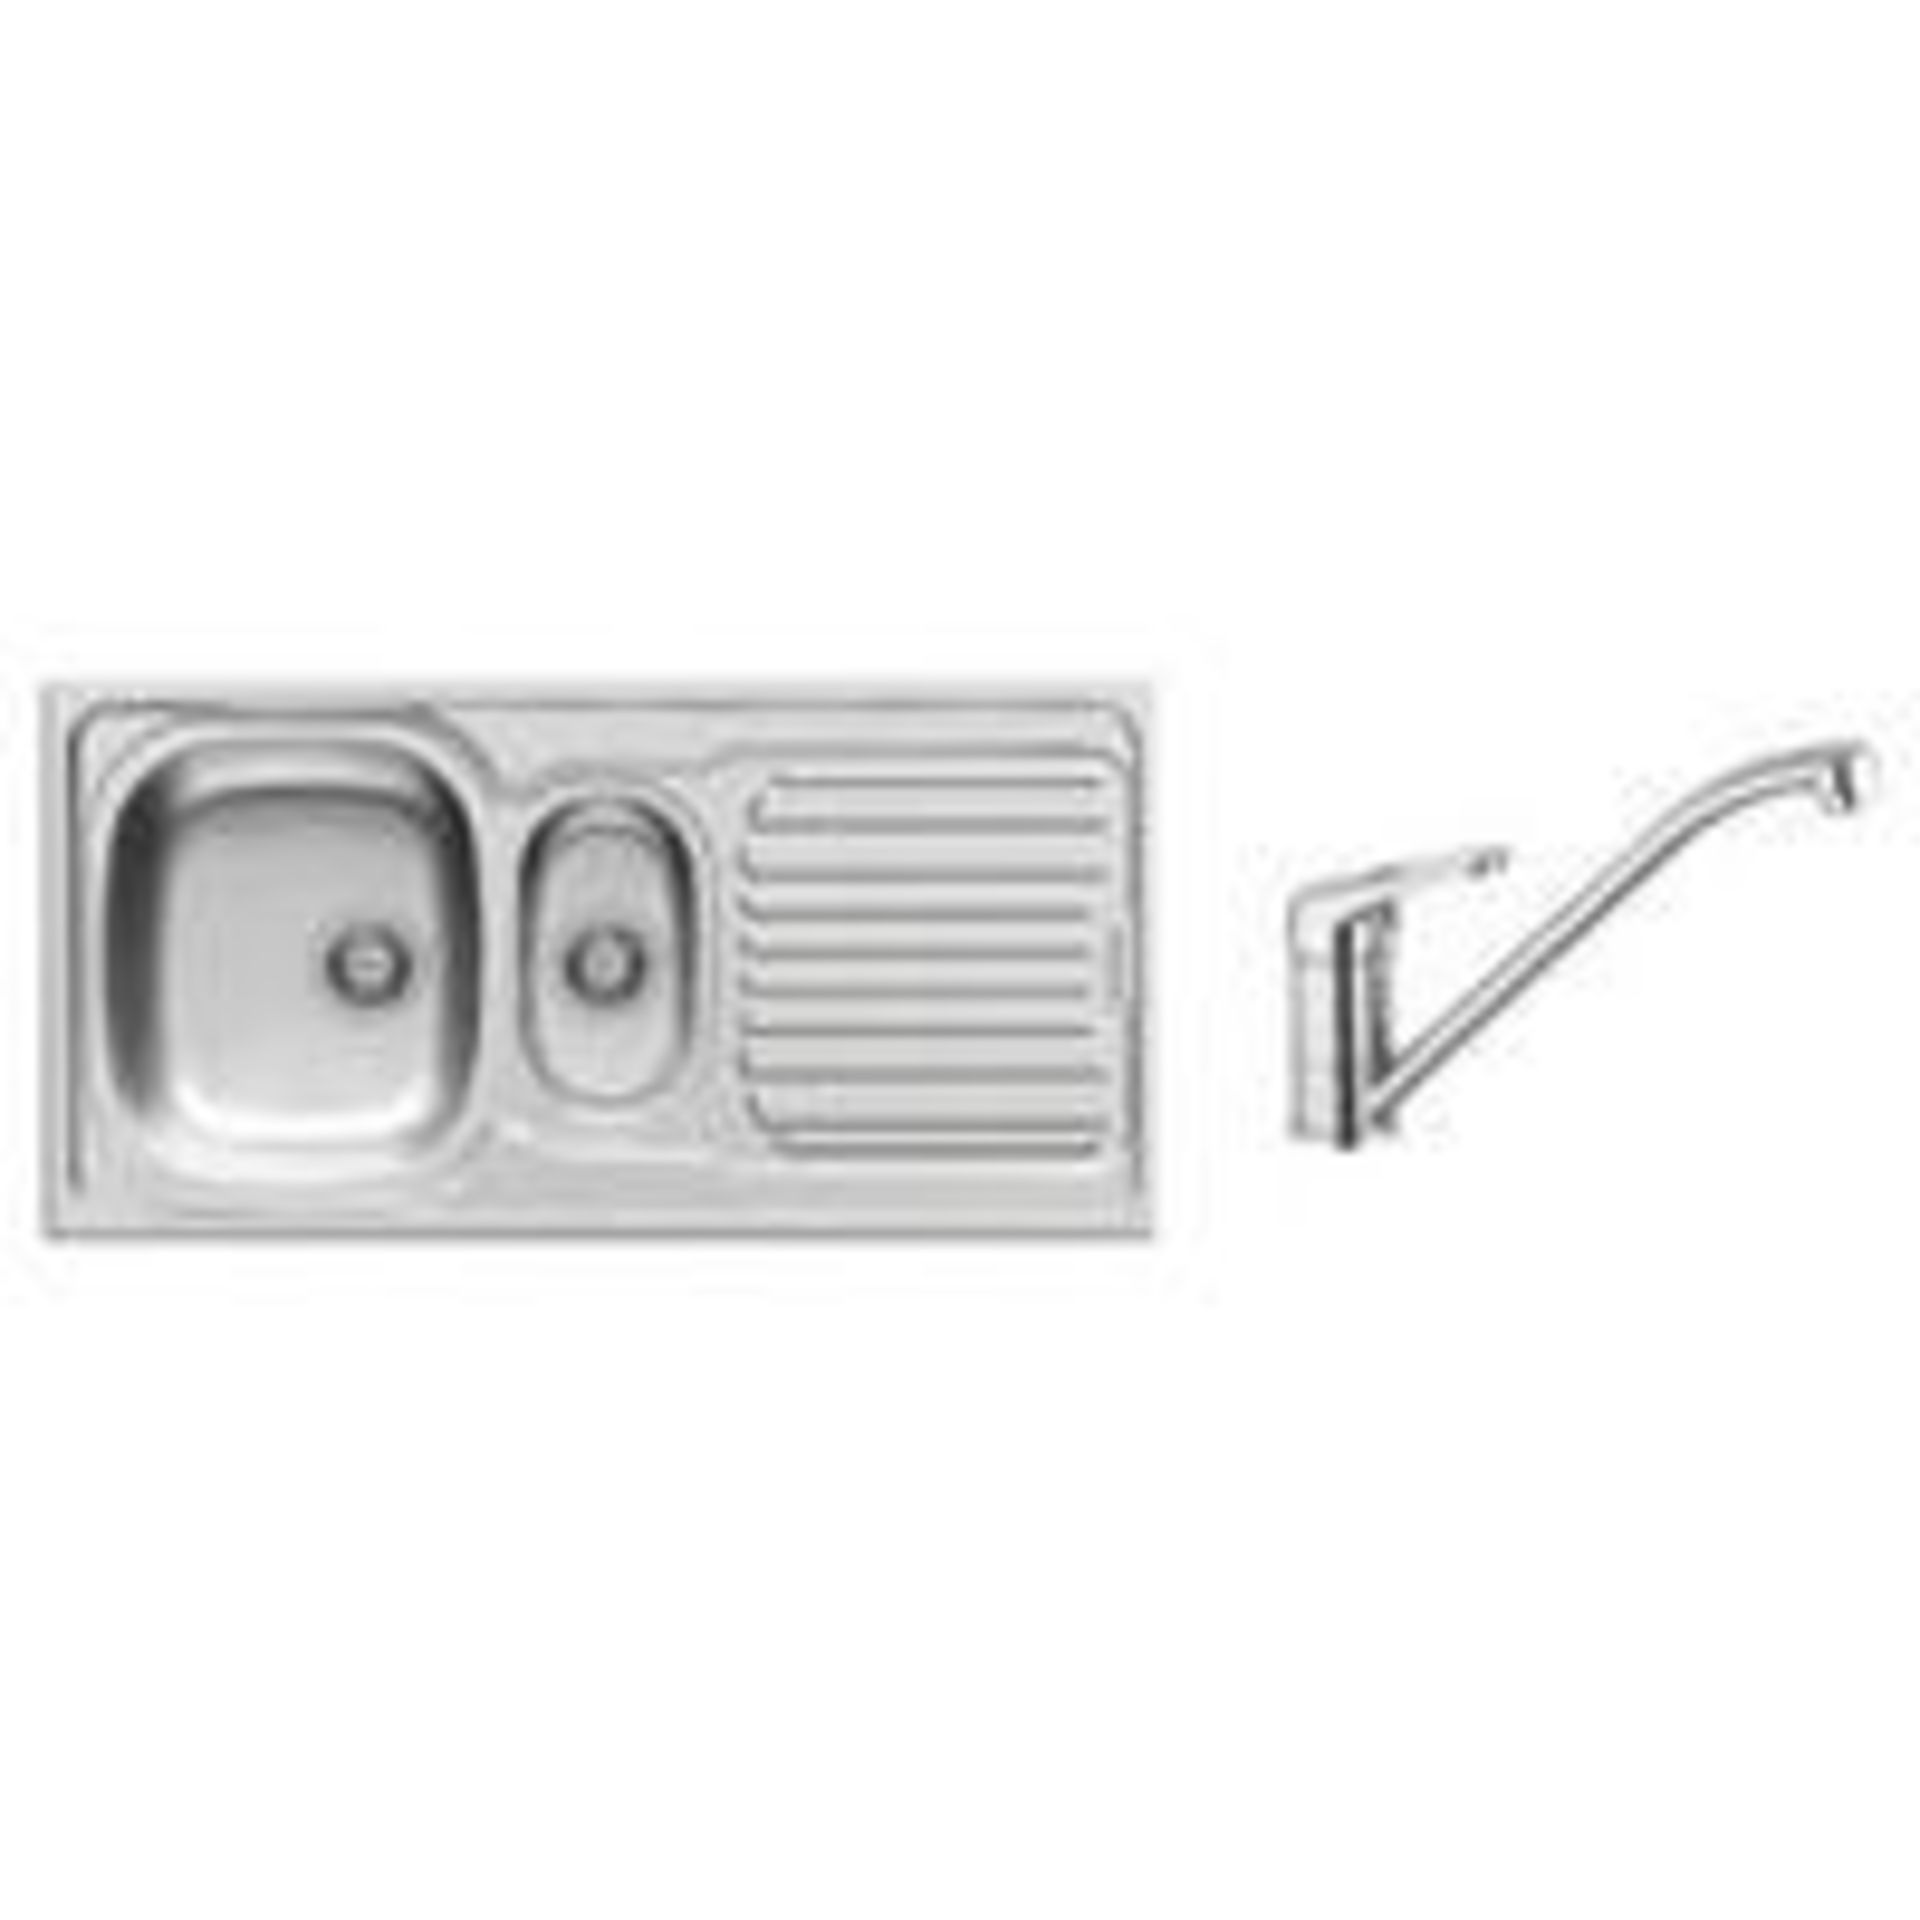 V Brand New Pyramis 1.5 Bowl Stainless Steel Sink and Tap RRP £89.99 - Image 2 of 3